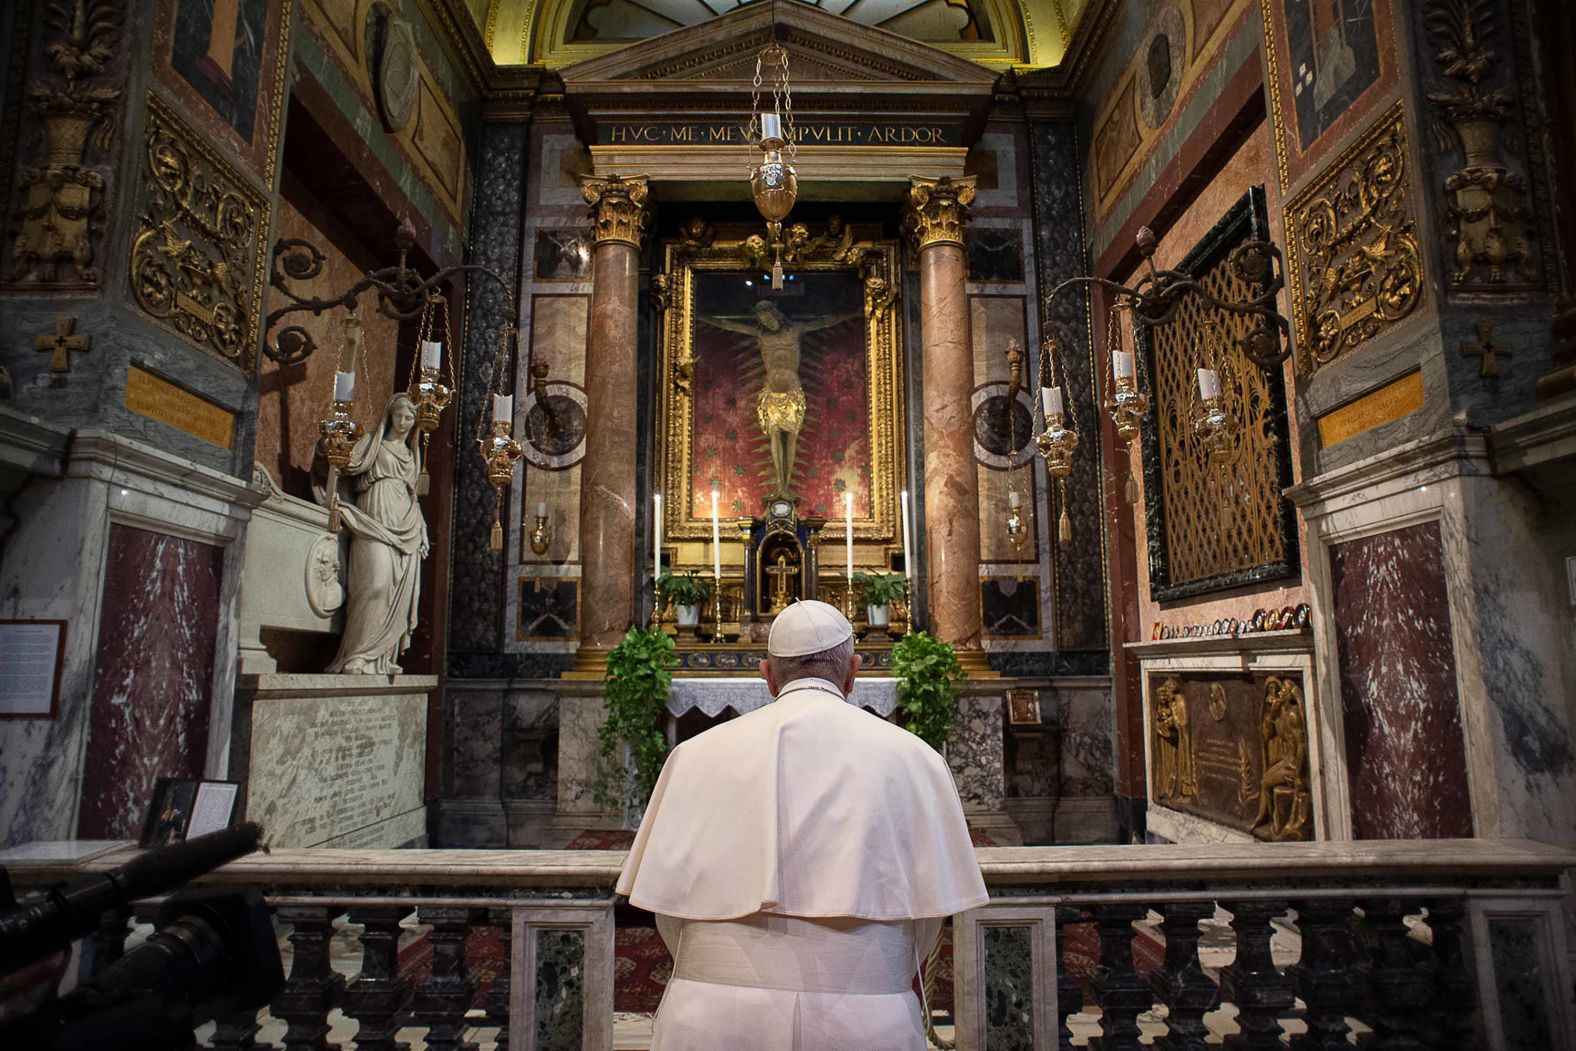 Pope Francis, inside the Church of San Marcello in Rome's city center,<a href="https://edition.cnn.com/2020/03/16/europe/pope-francis-prayer-coronavirus-plague-crucifix-intl/index.html" target="_blank"> prays at a famous crucifix</a> that believers claim helped to save Romans from the plague in 1522.